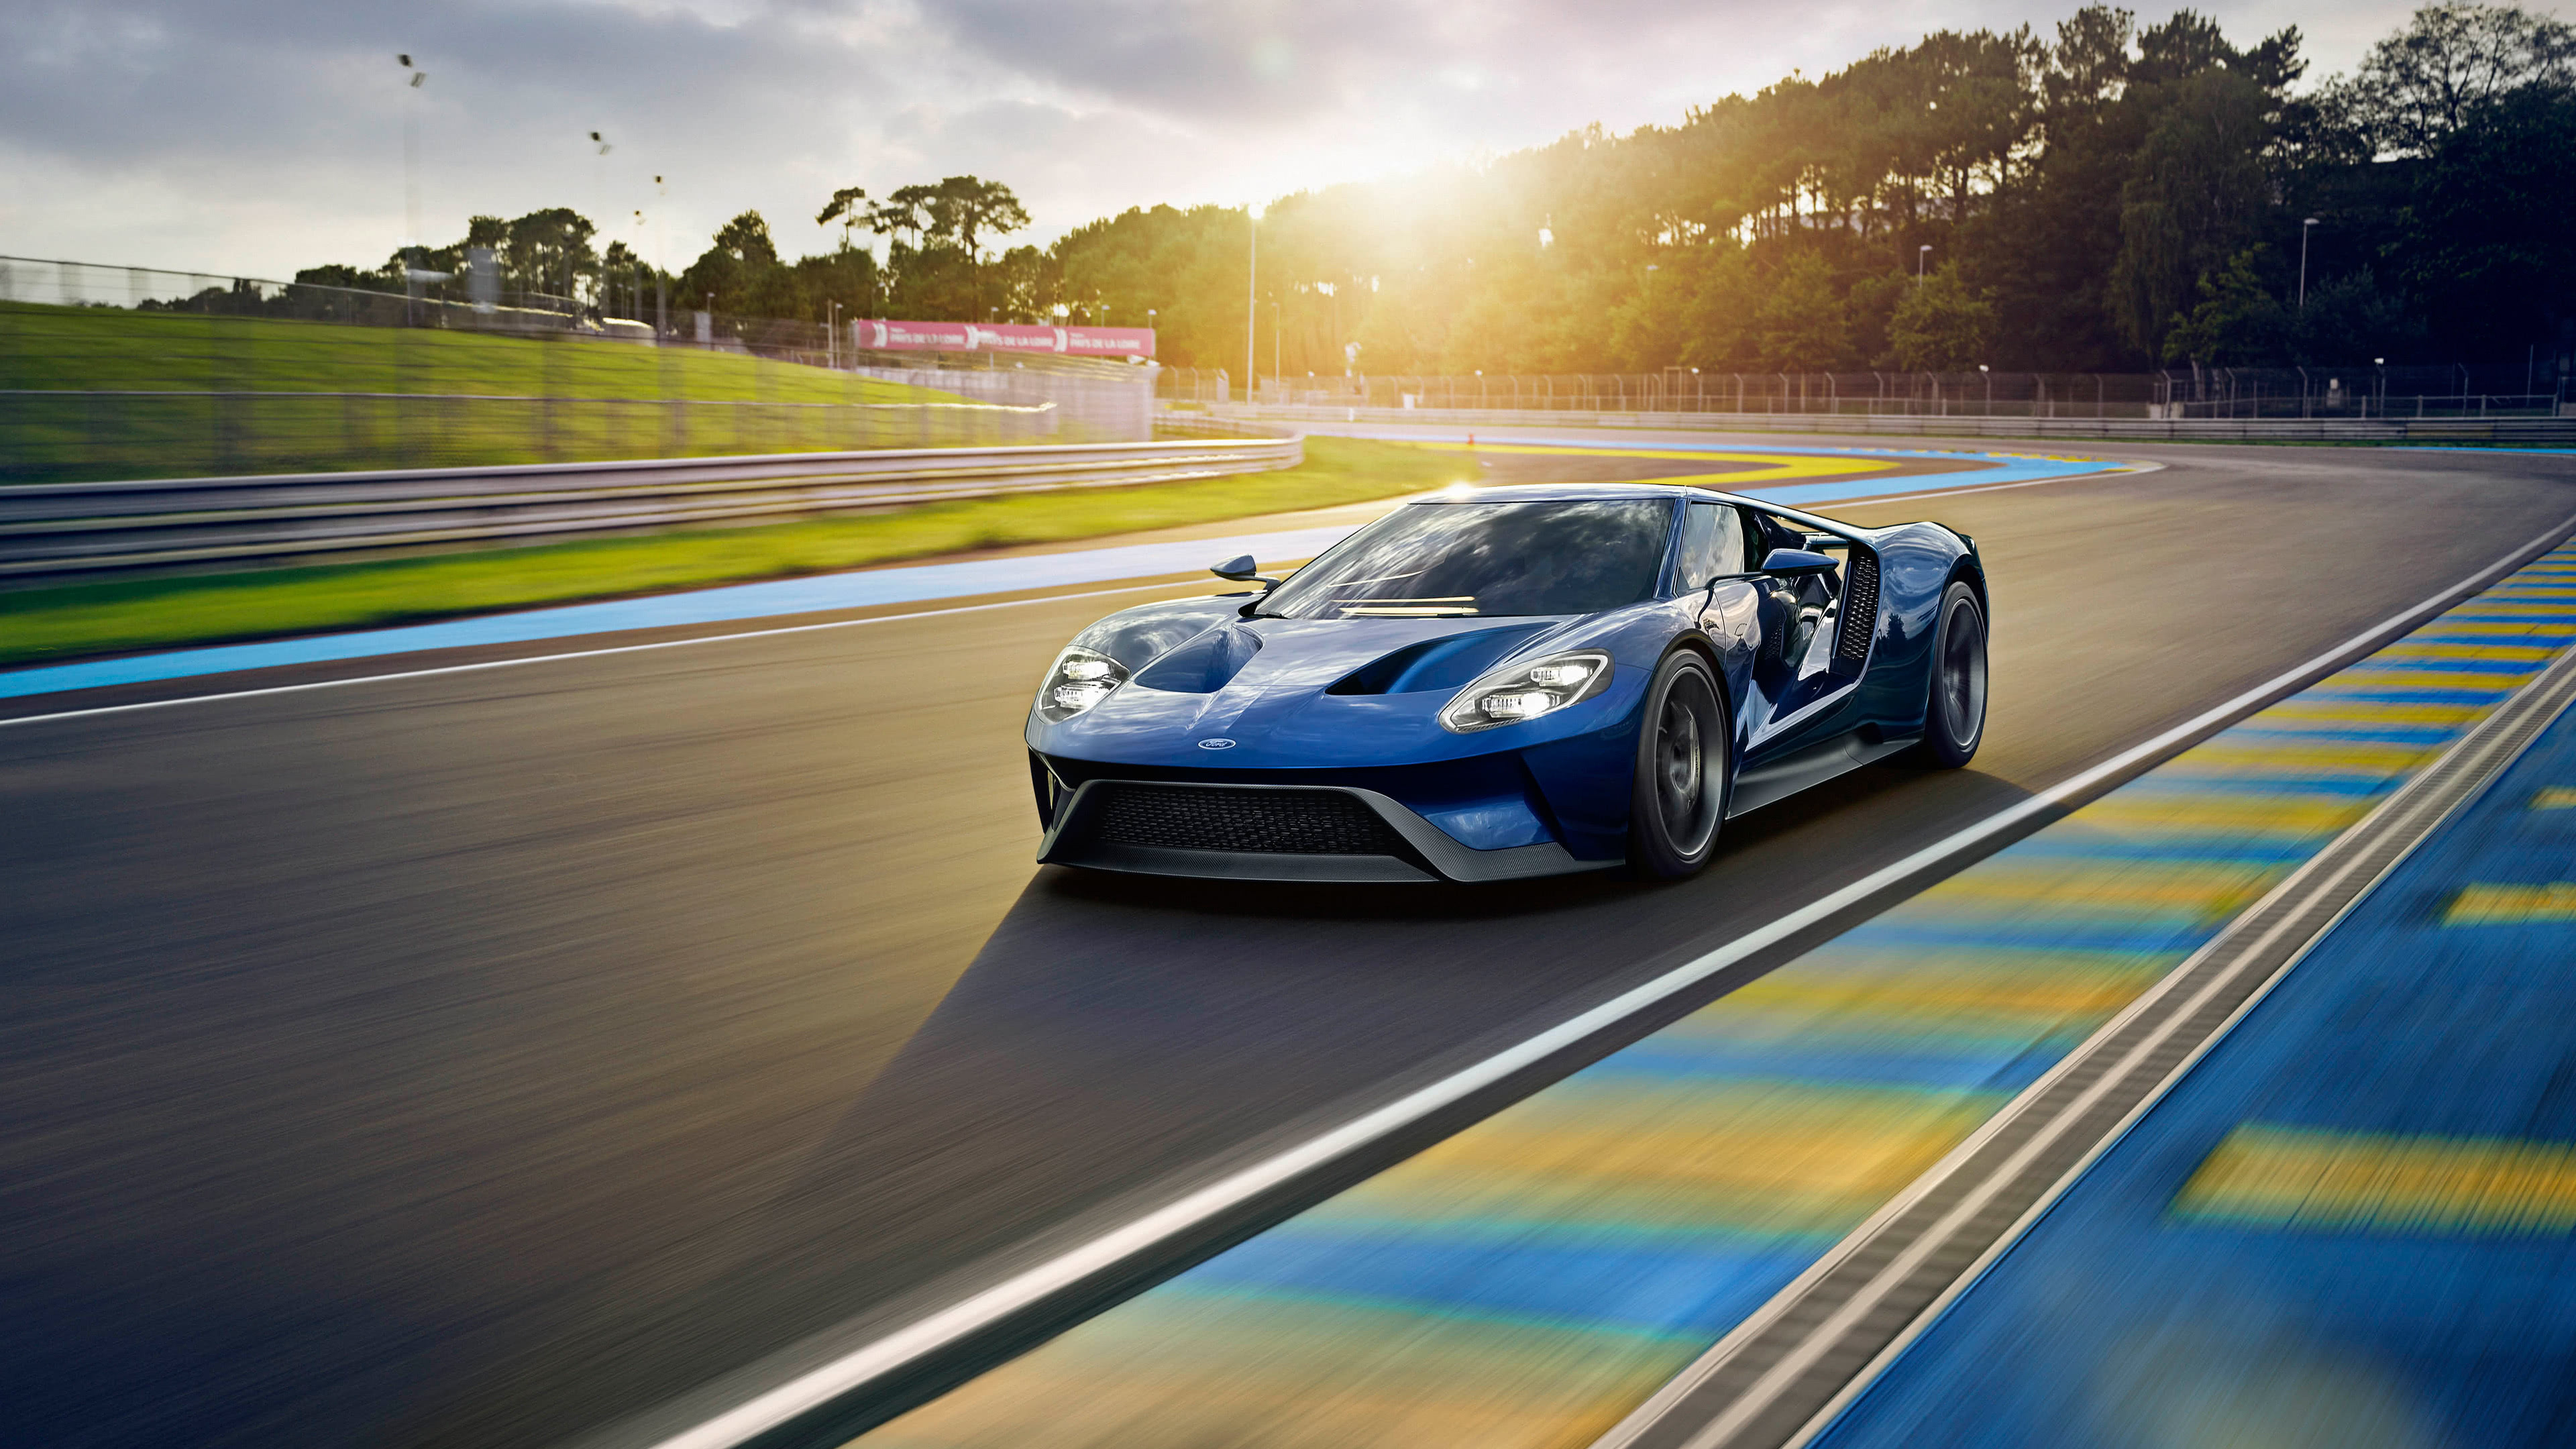 Motorsports: Ford GT at the racing track, Competitive sporting events with the use of motorized vehicles. 3840x2160 4K Wallpaper.